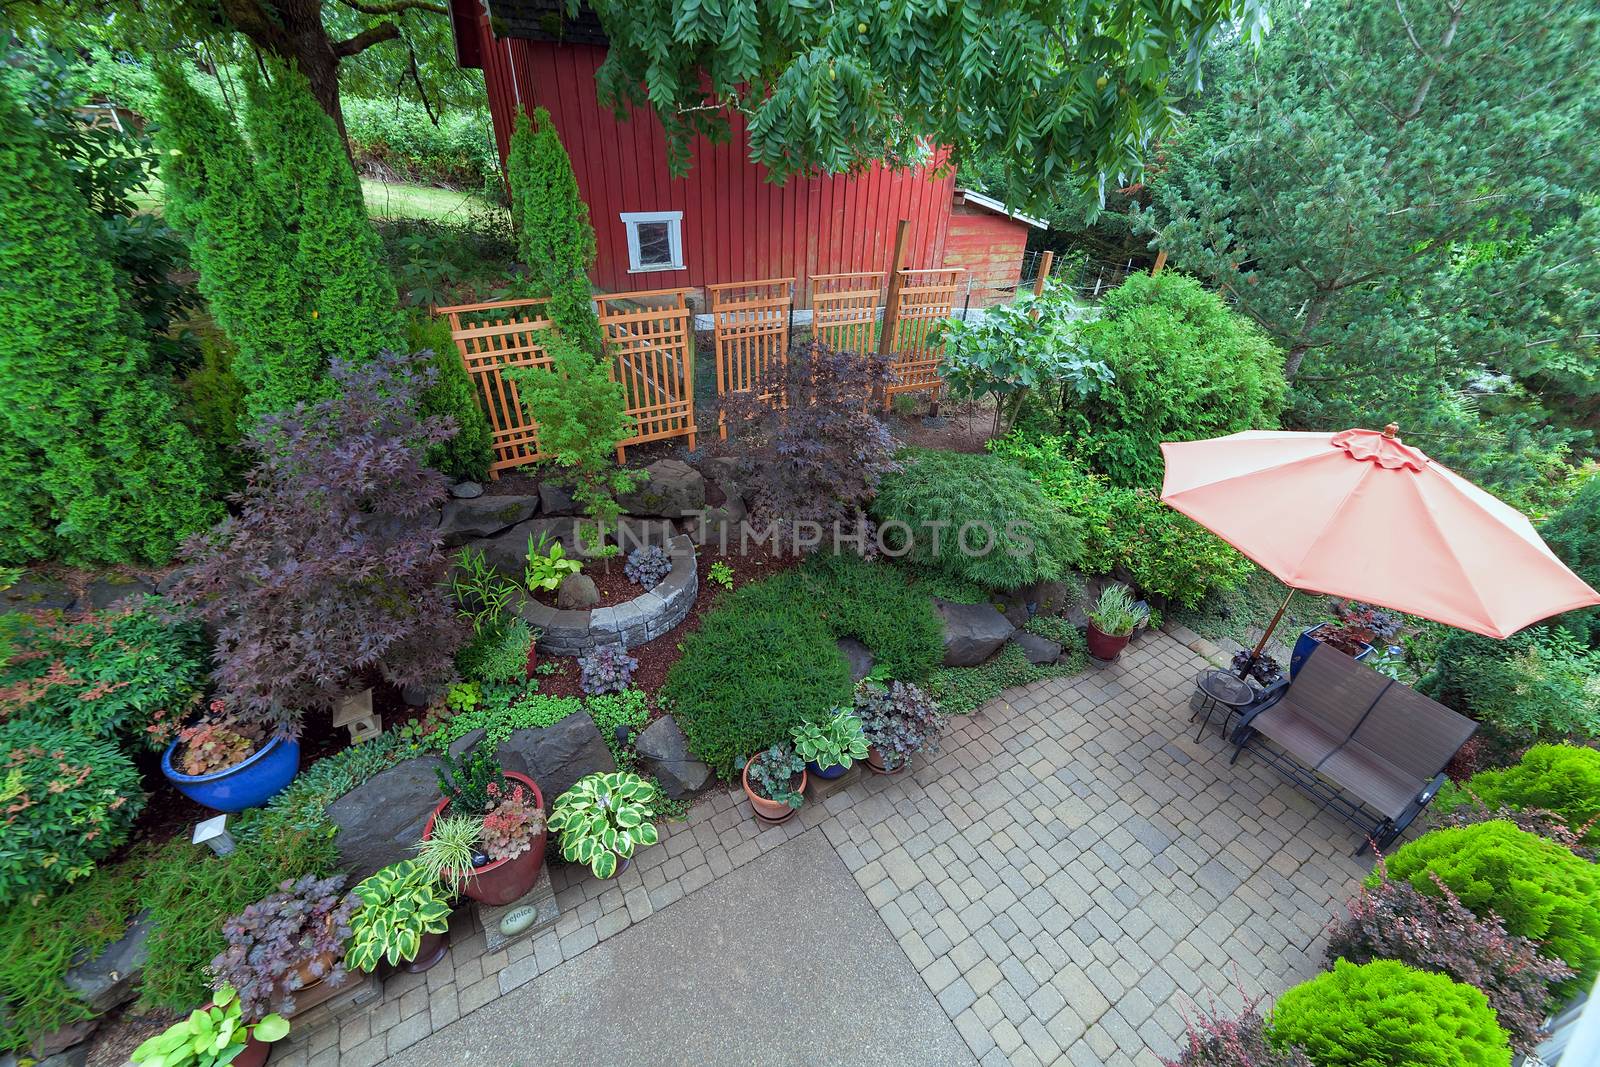 Backyard garden landscaping with paver bricks patio hardscape trees potted plants shrubs pond rocks furniture and red barn